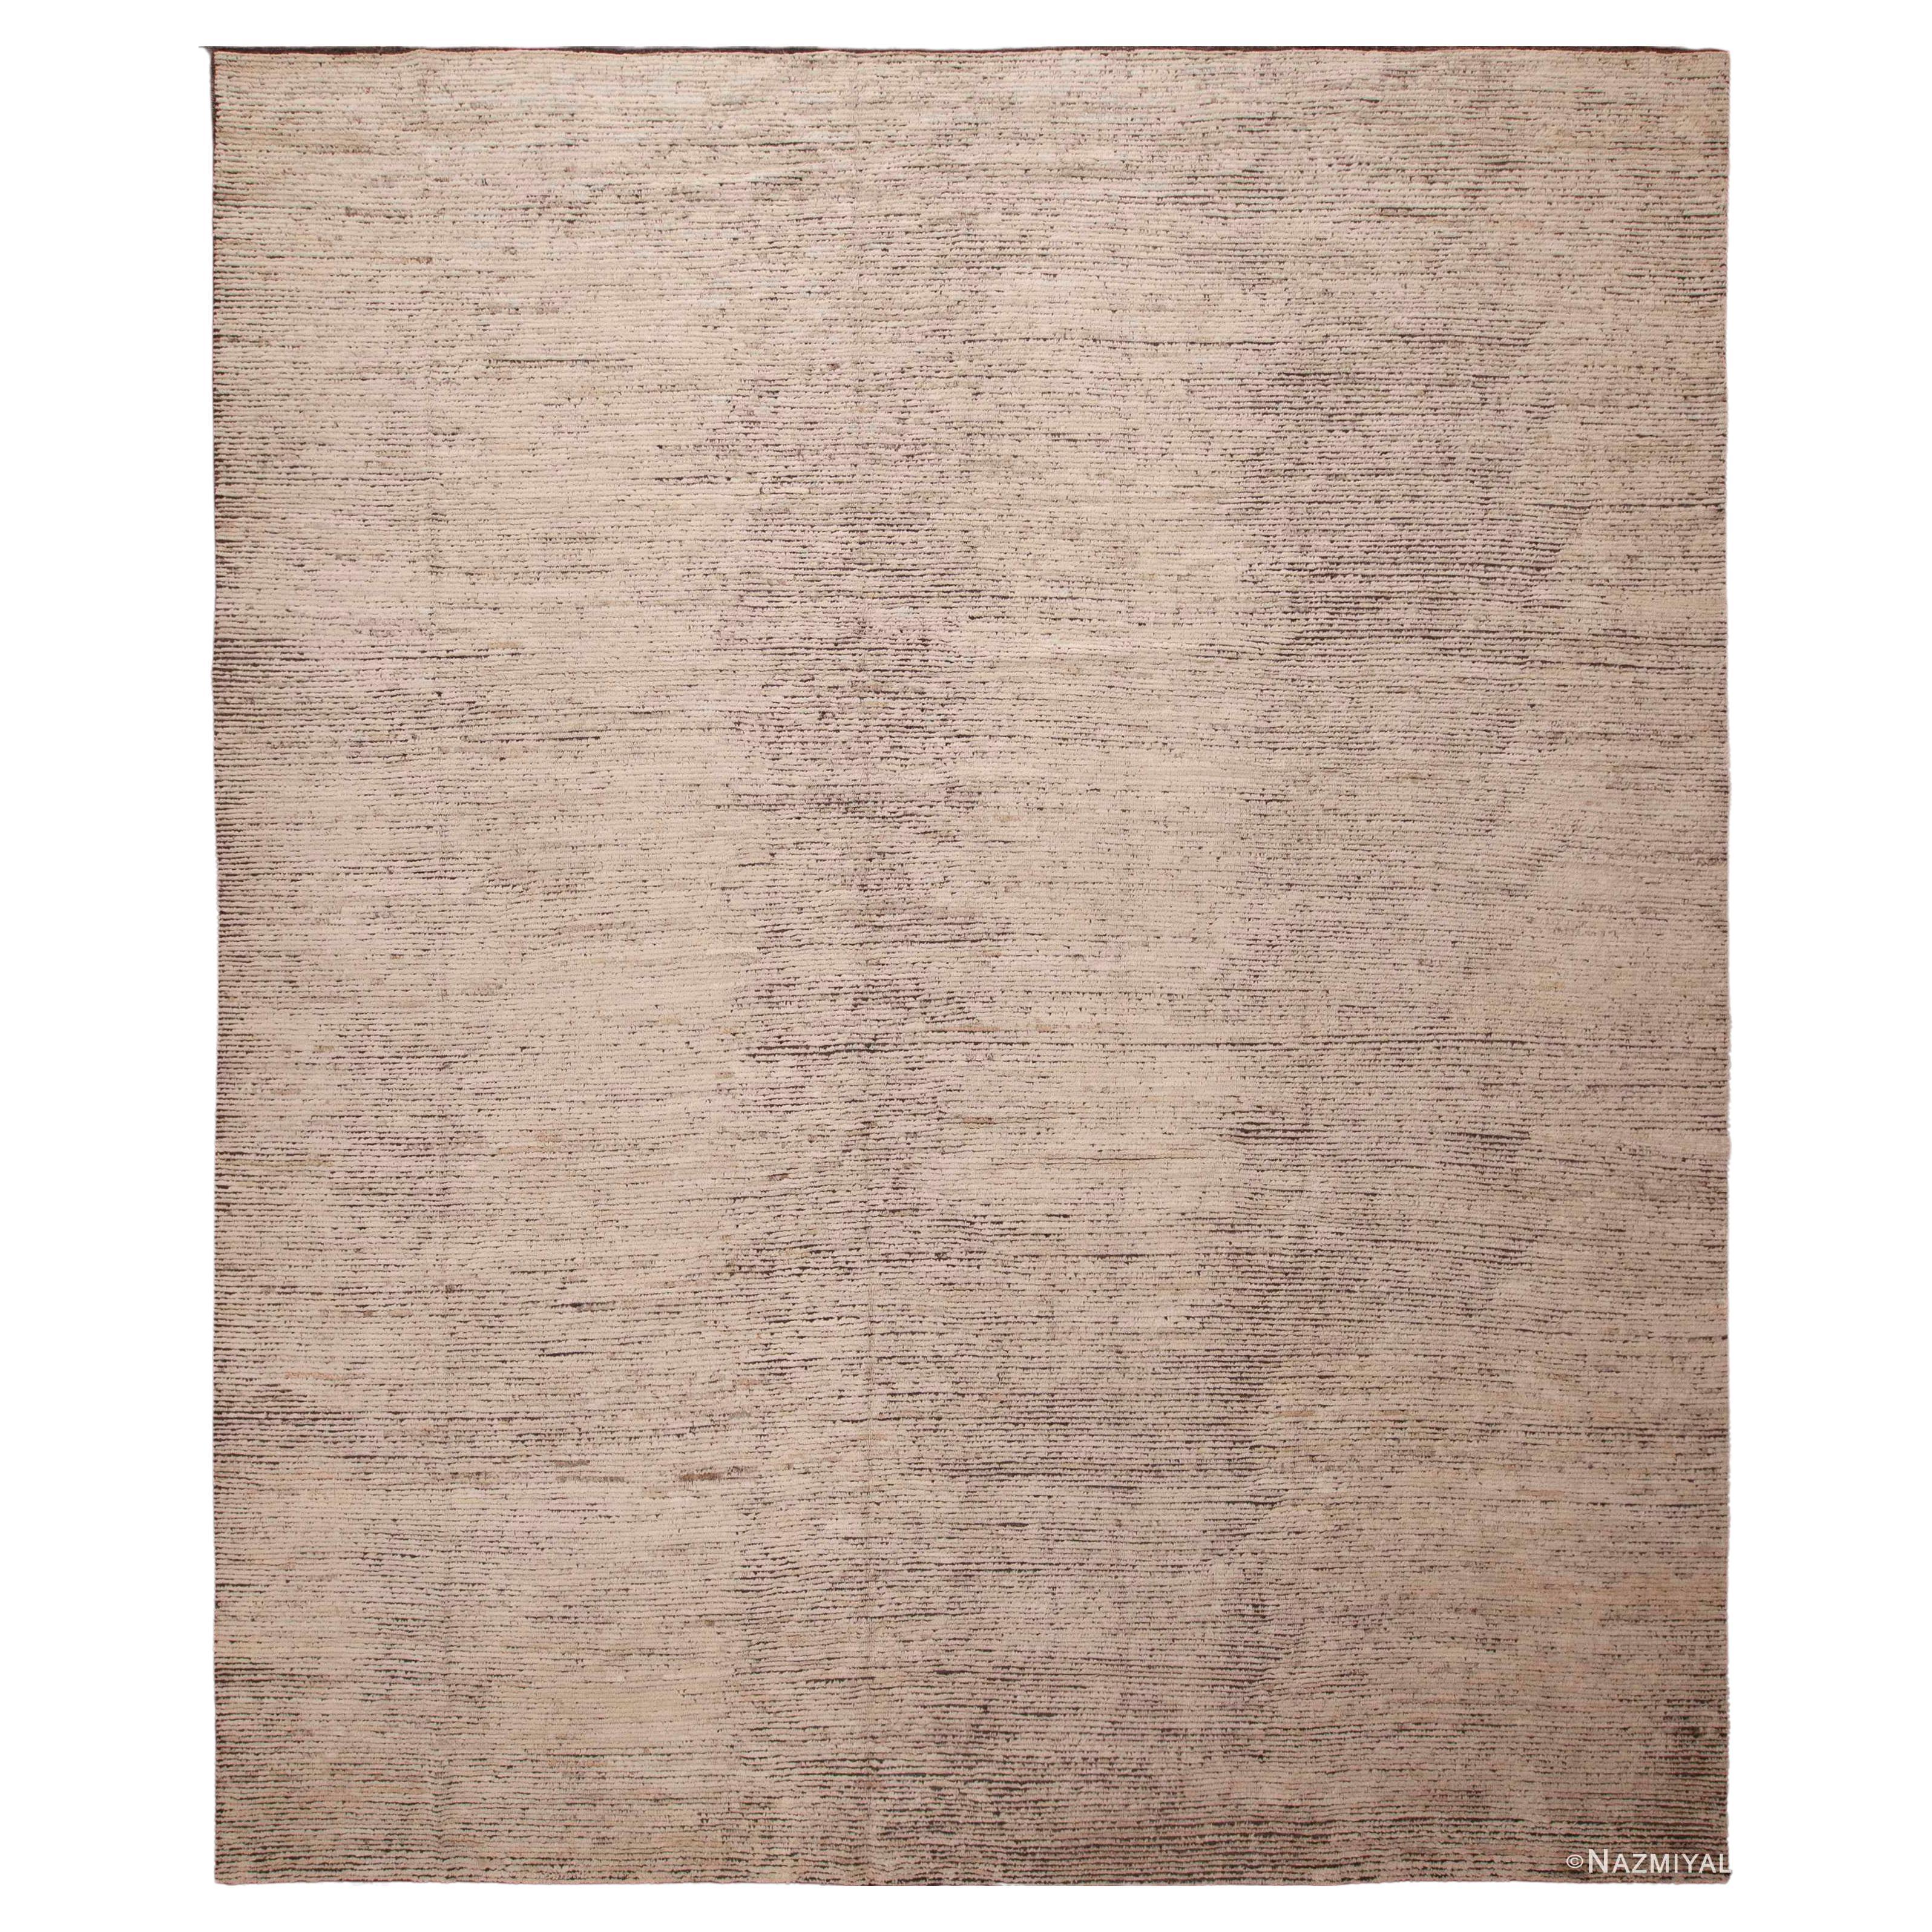 Nazmiyal Collection Abstract Modern Wool Pile Room Size Area Rug 12'3" x 14'6"